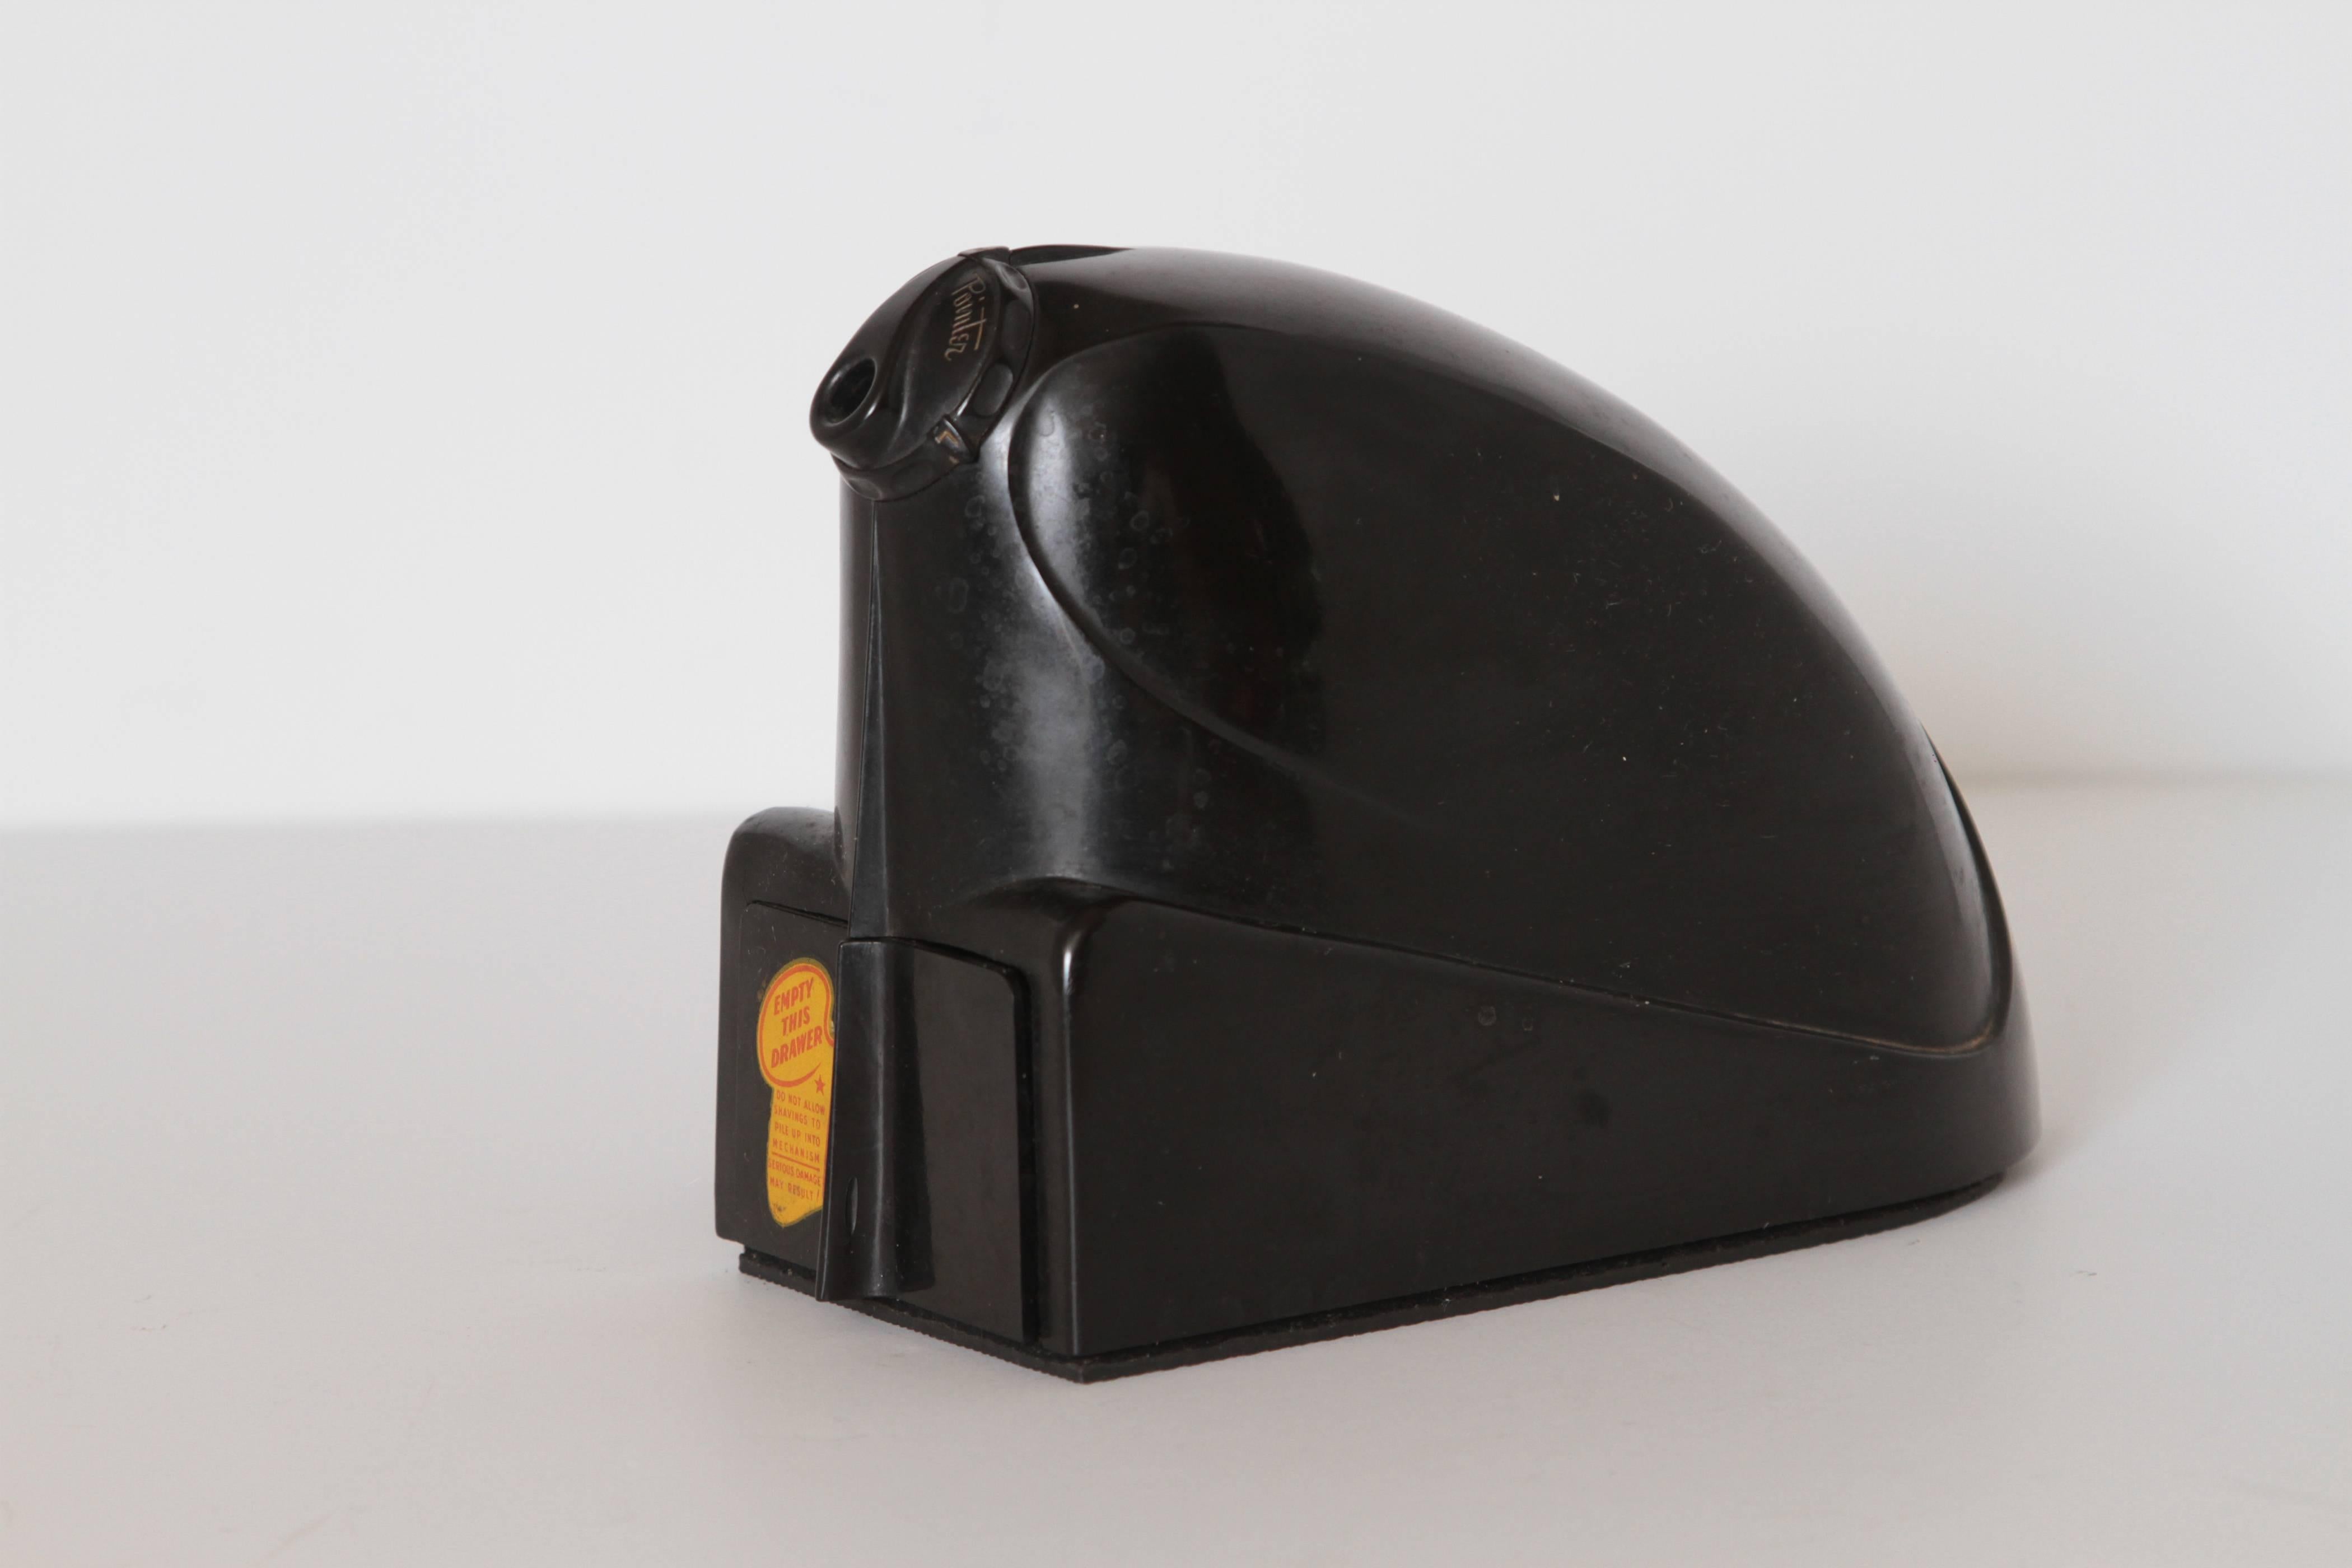 Machine Age Art Deco Streamline electro pointer bakelite electric pencil sharpener. Industrial design.  PRICE REDUCED

Another original Machine Age sculptural design Icon you will rarely find in this condition with original tag, sticker, and